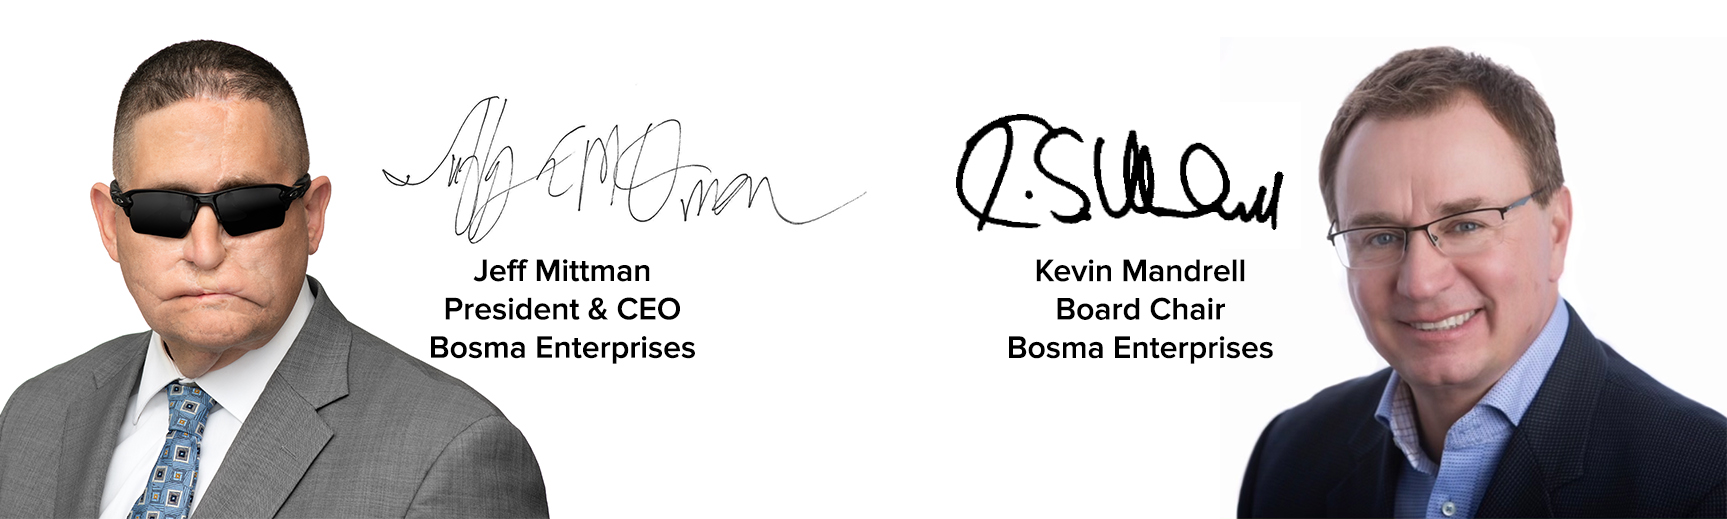 Headshots of CEO and Board Chair with signatures